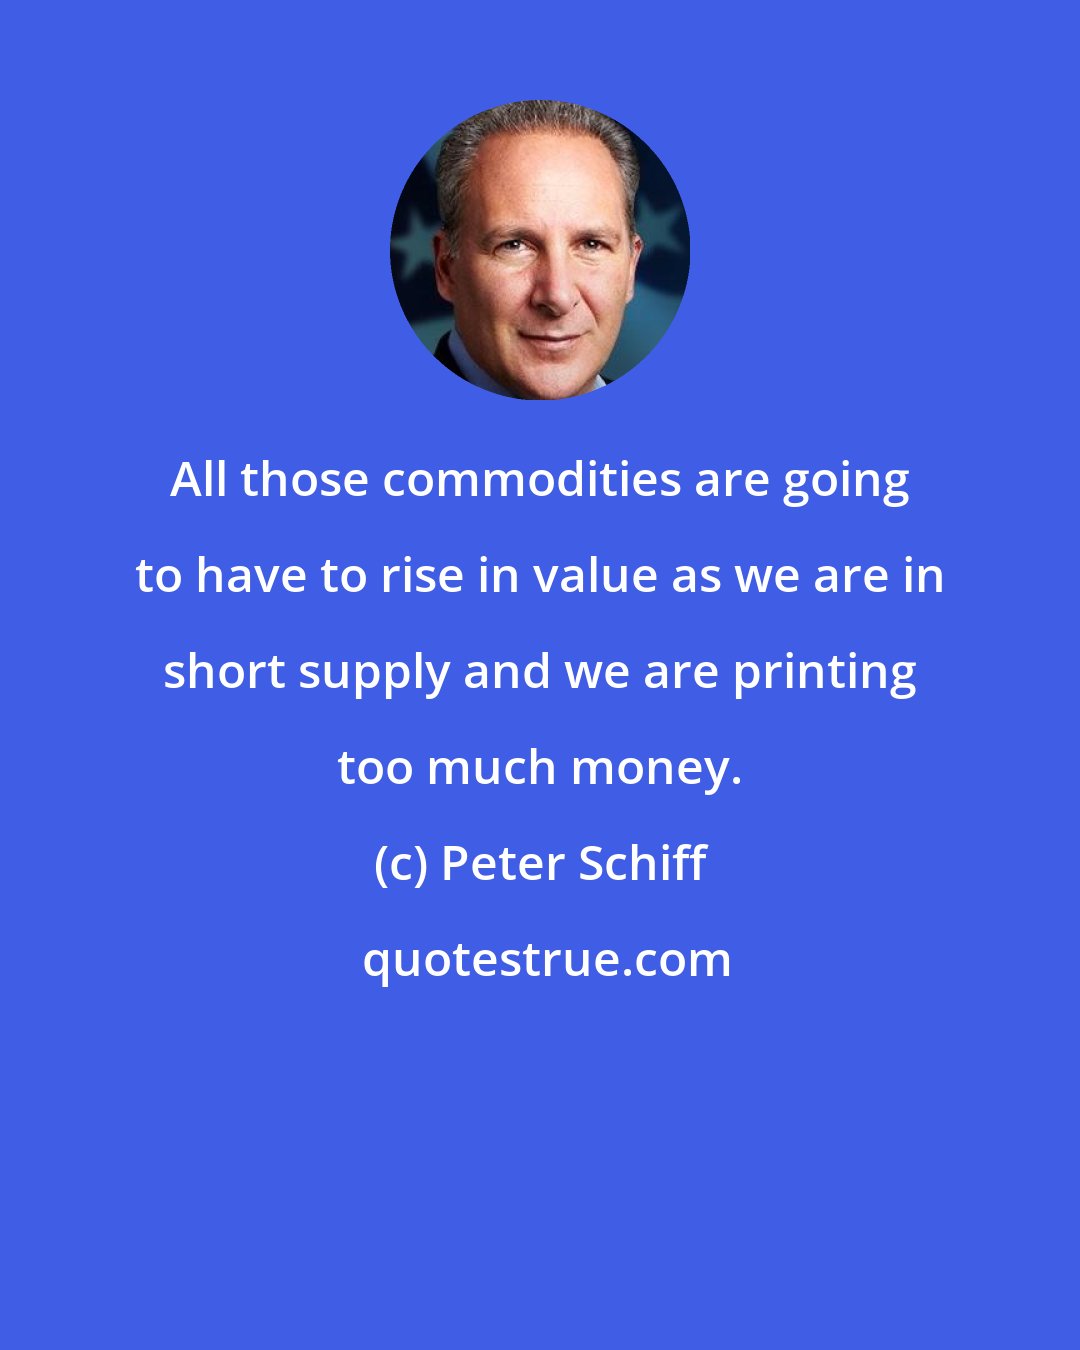 Peter Schiff: All those commodities are going to have to rise in value as we are in short supply and we are printing too much money.